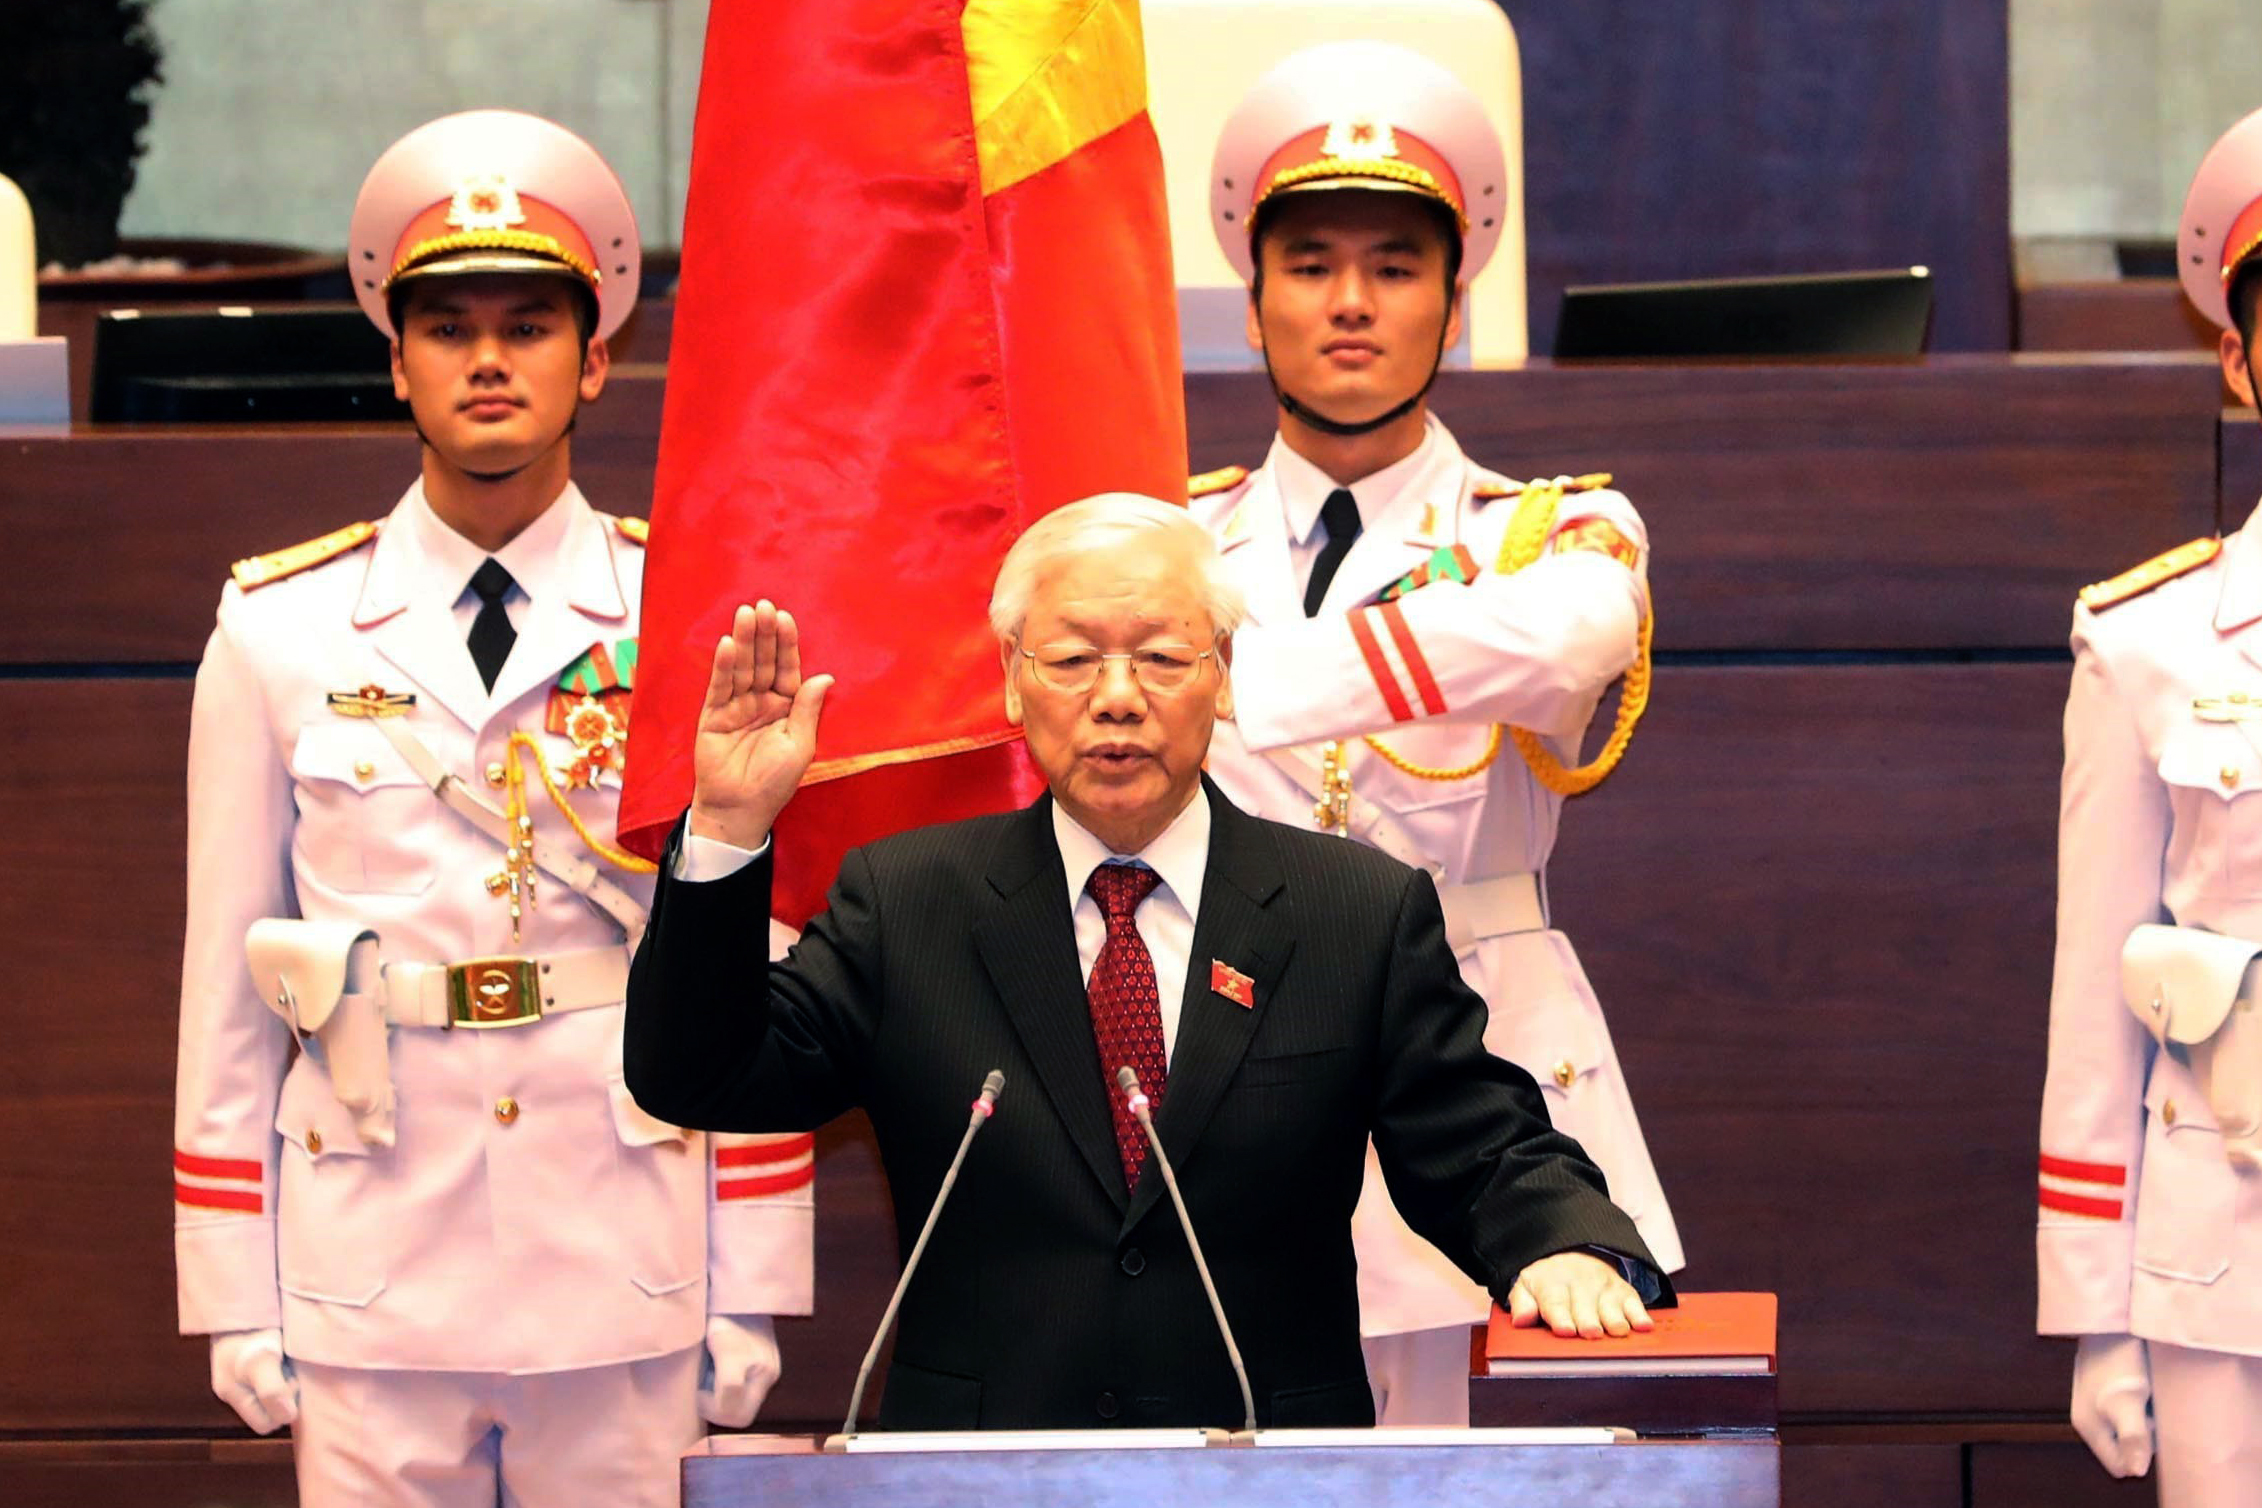 Vietnam communist party chief Nguyen Phu Trong takes oath as country's president at the National Assembly hall in Hanoi on October 23, 2018. (AFP/Getty Images)